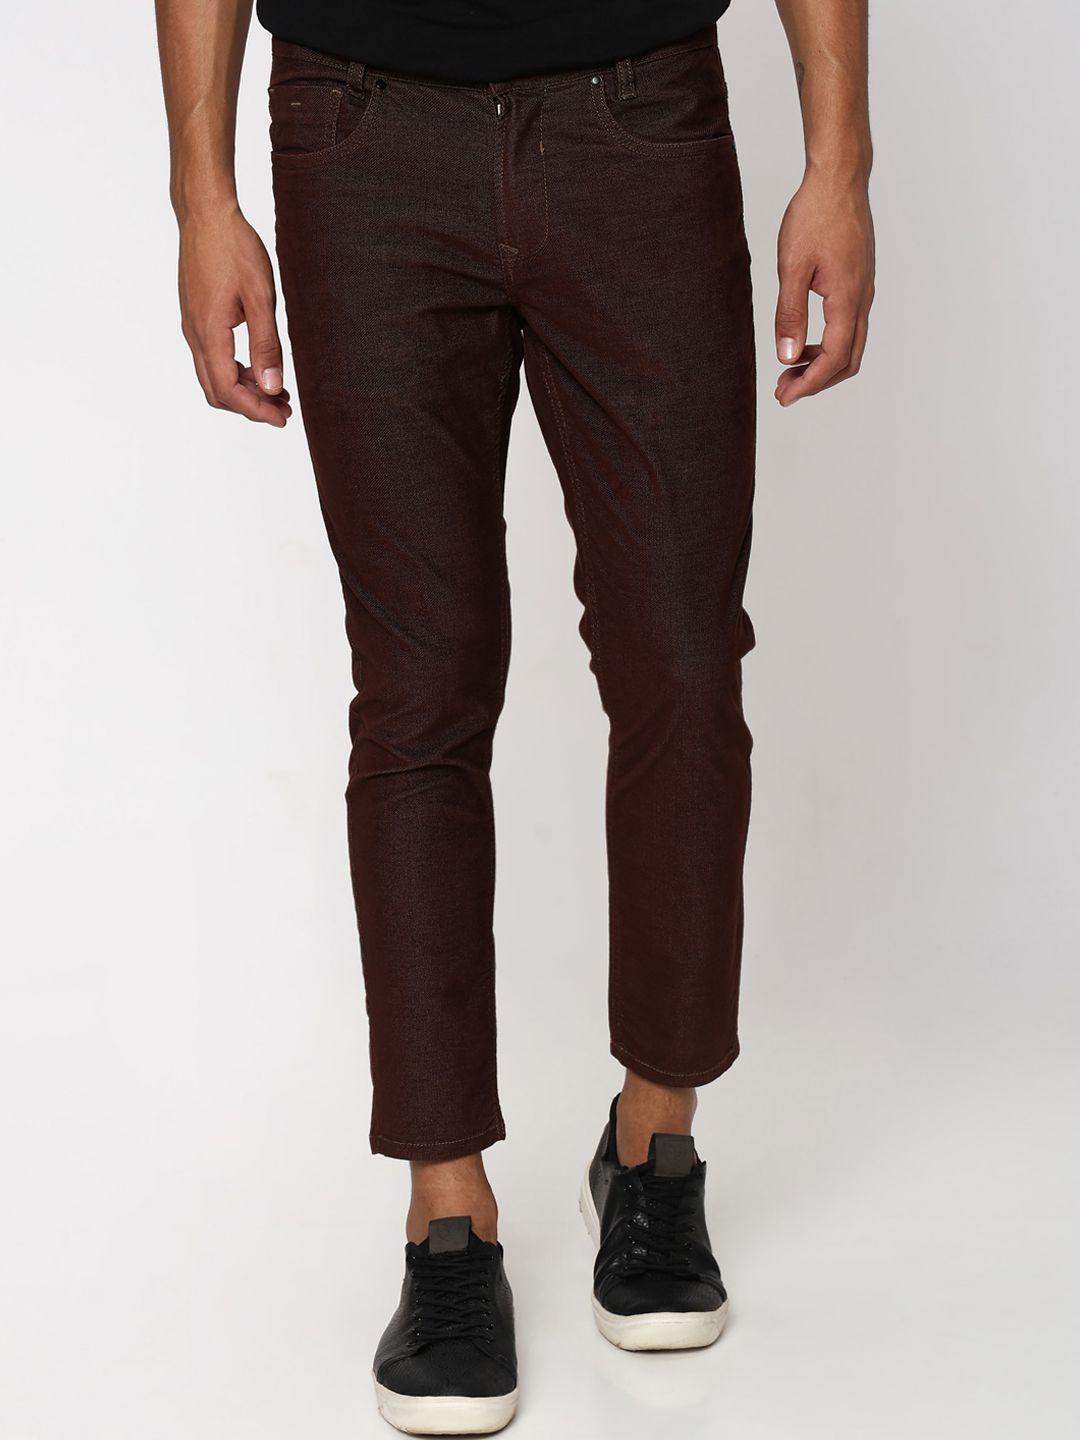 mufti-men-mid-rise-tapered-fit-trousers